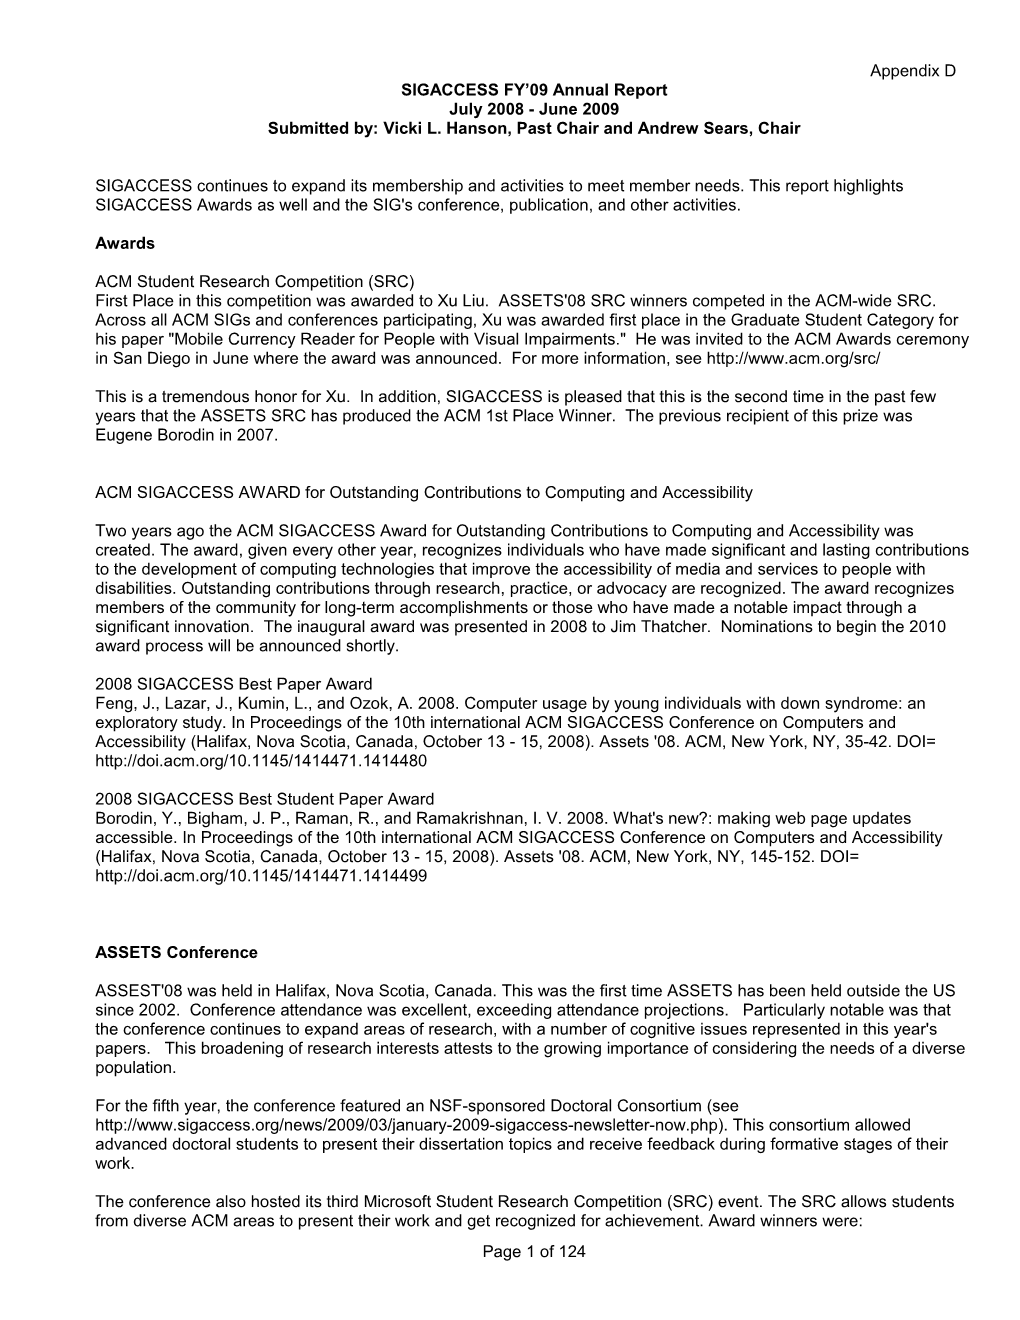 SIGACCESS FY 04 Annual Report s1